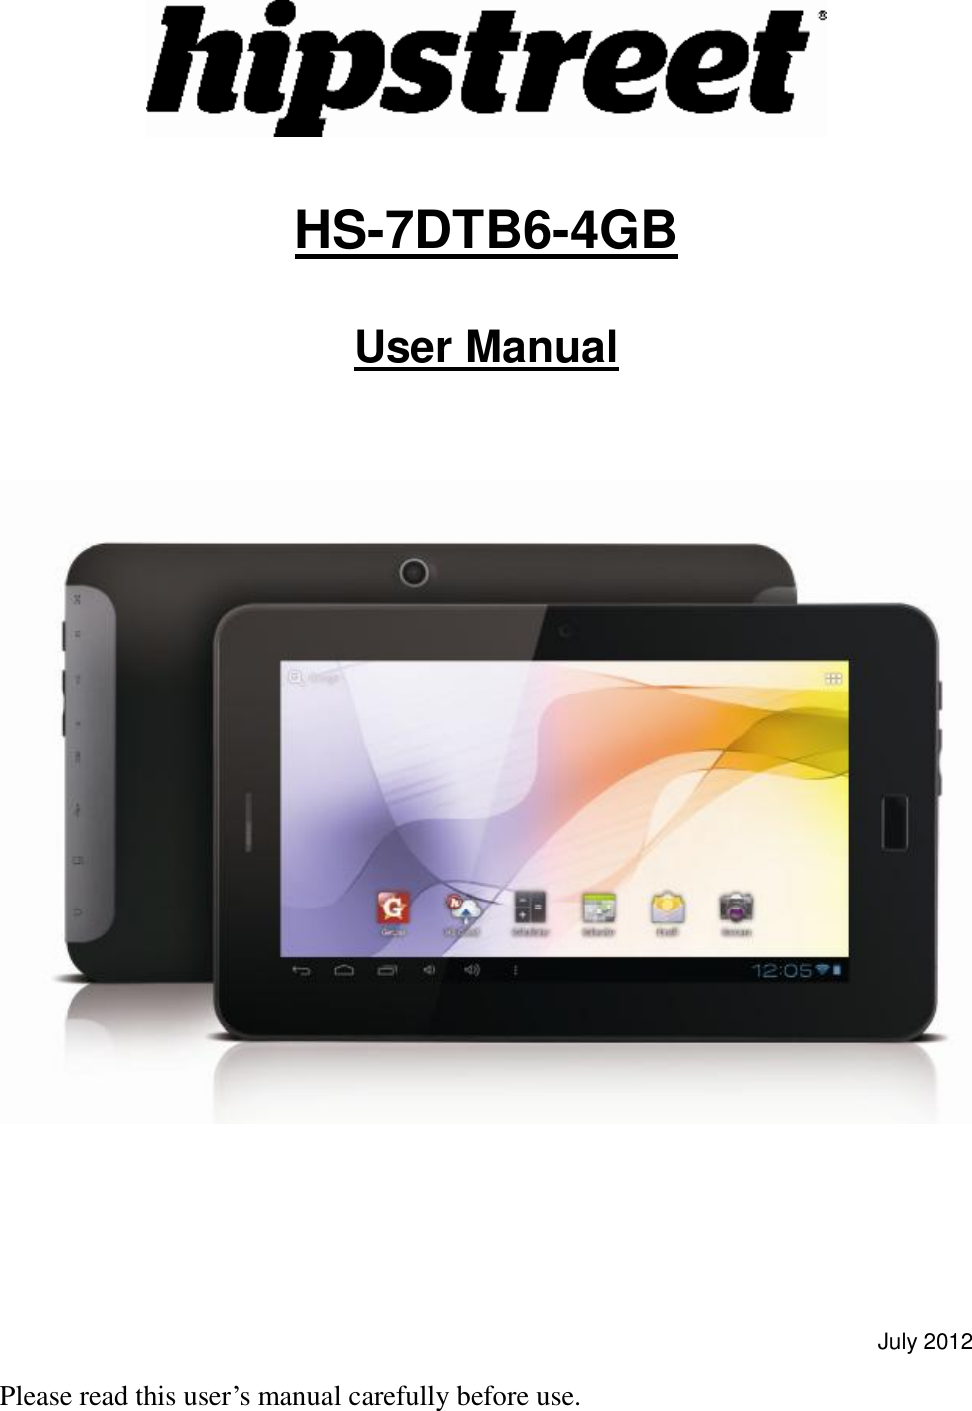    HS-7DTB6-4GB  User Manual           July 2012  Please read this user’s manual carefully before use. 